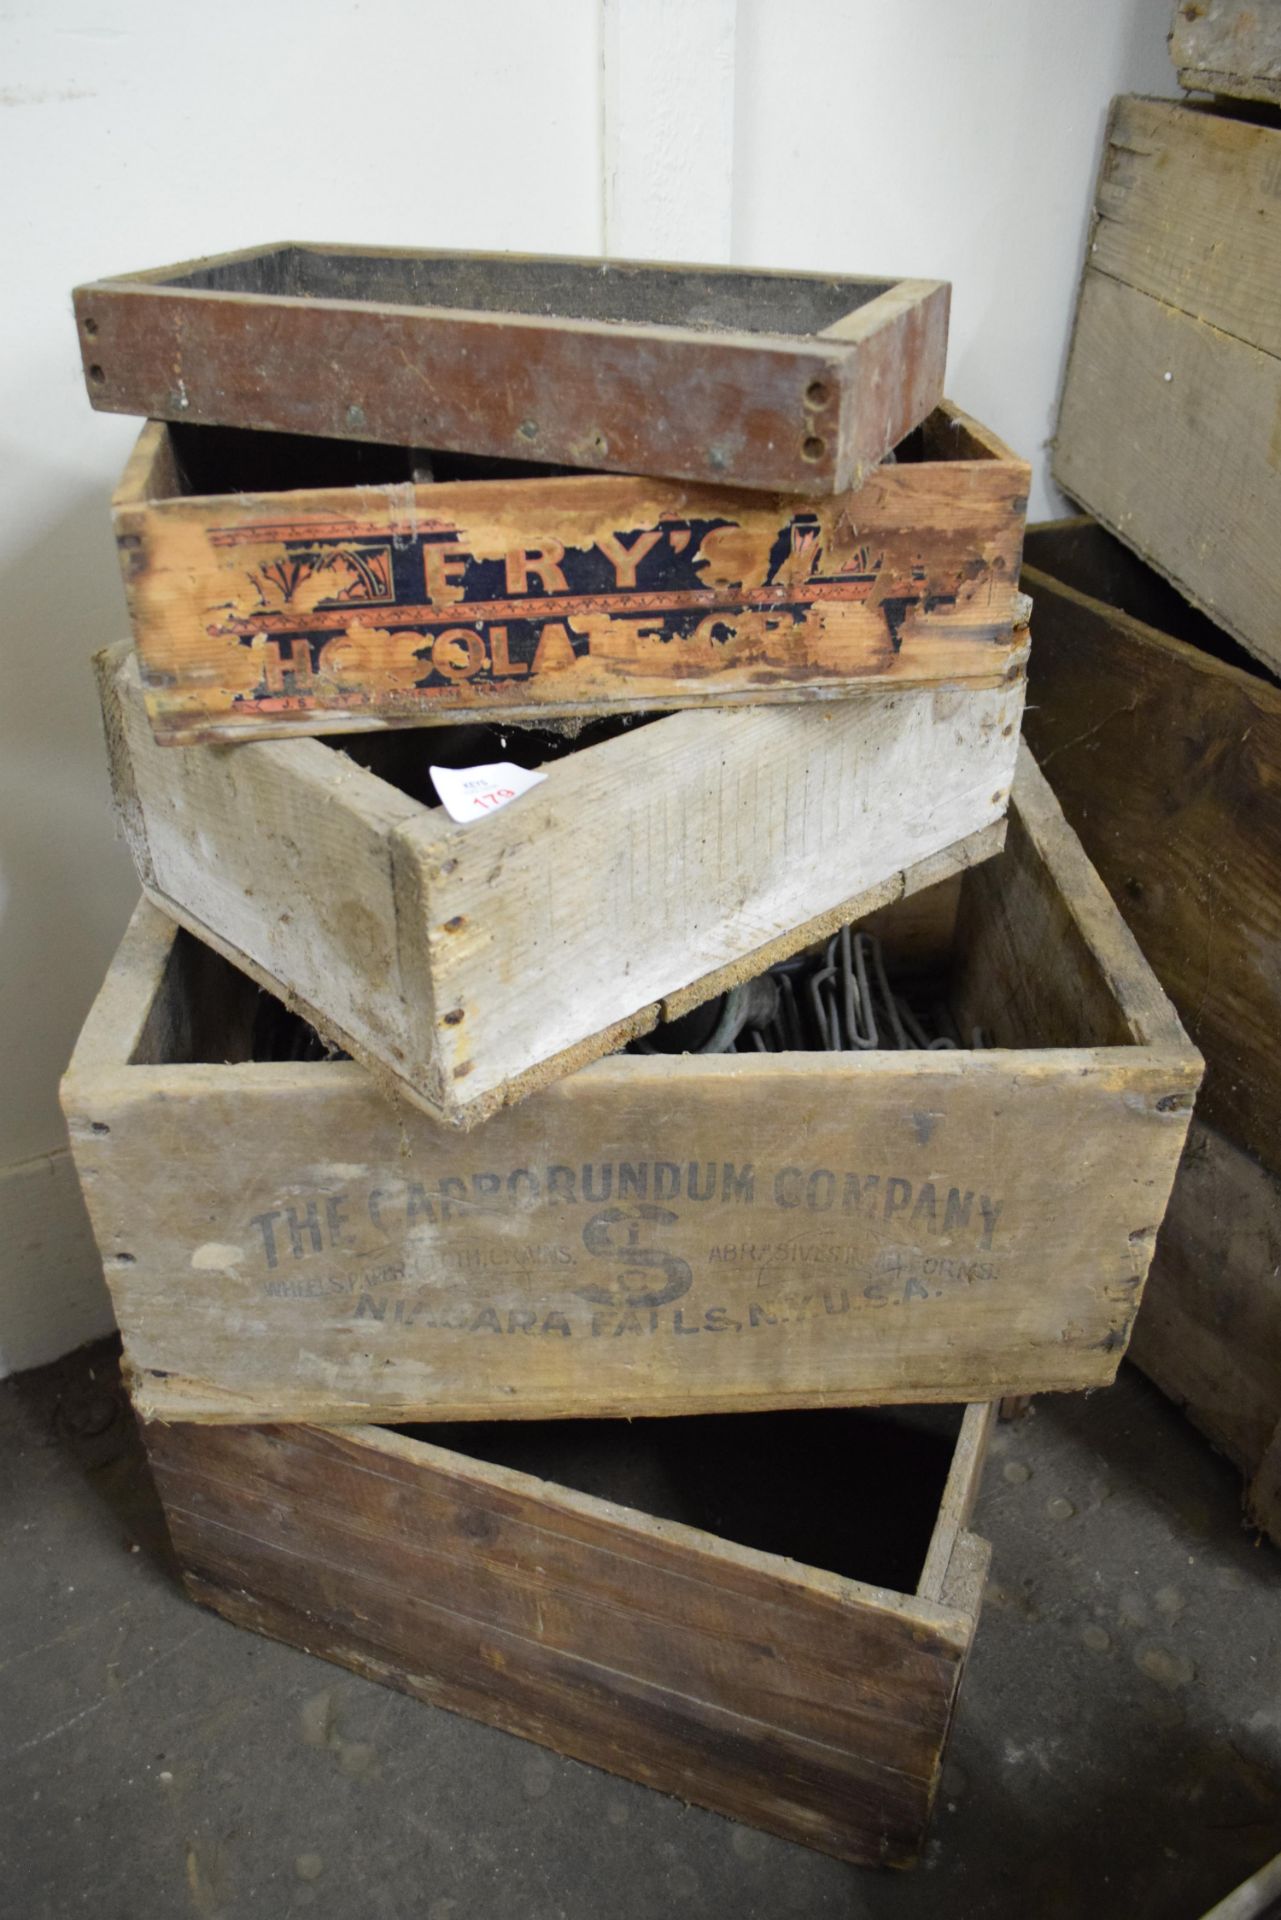 Quantity of vintage packing cases including The Carborundum Co etc, Frys Chocolate etc